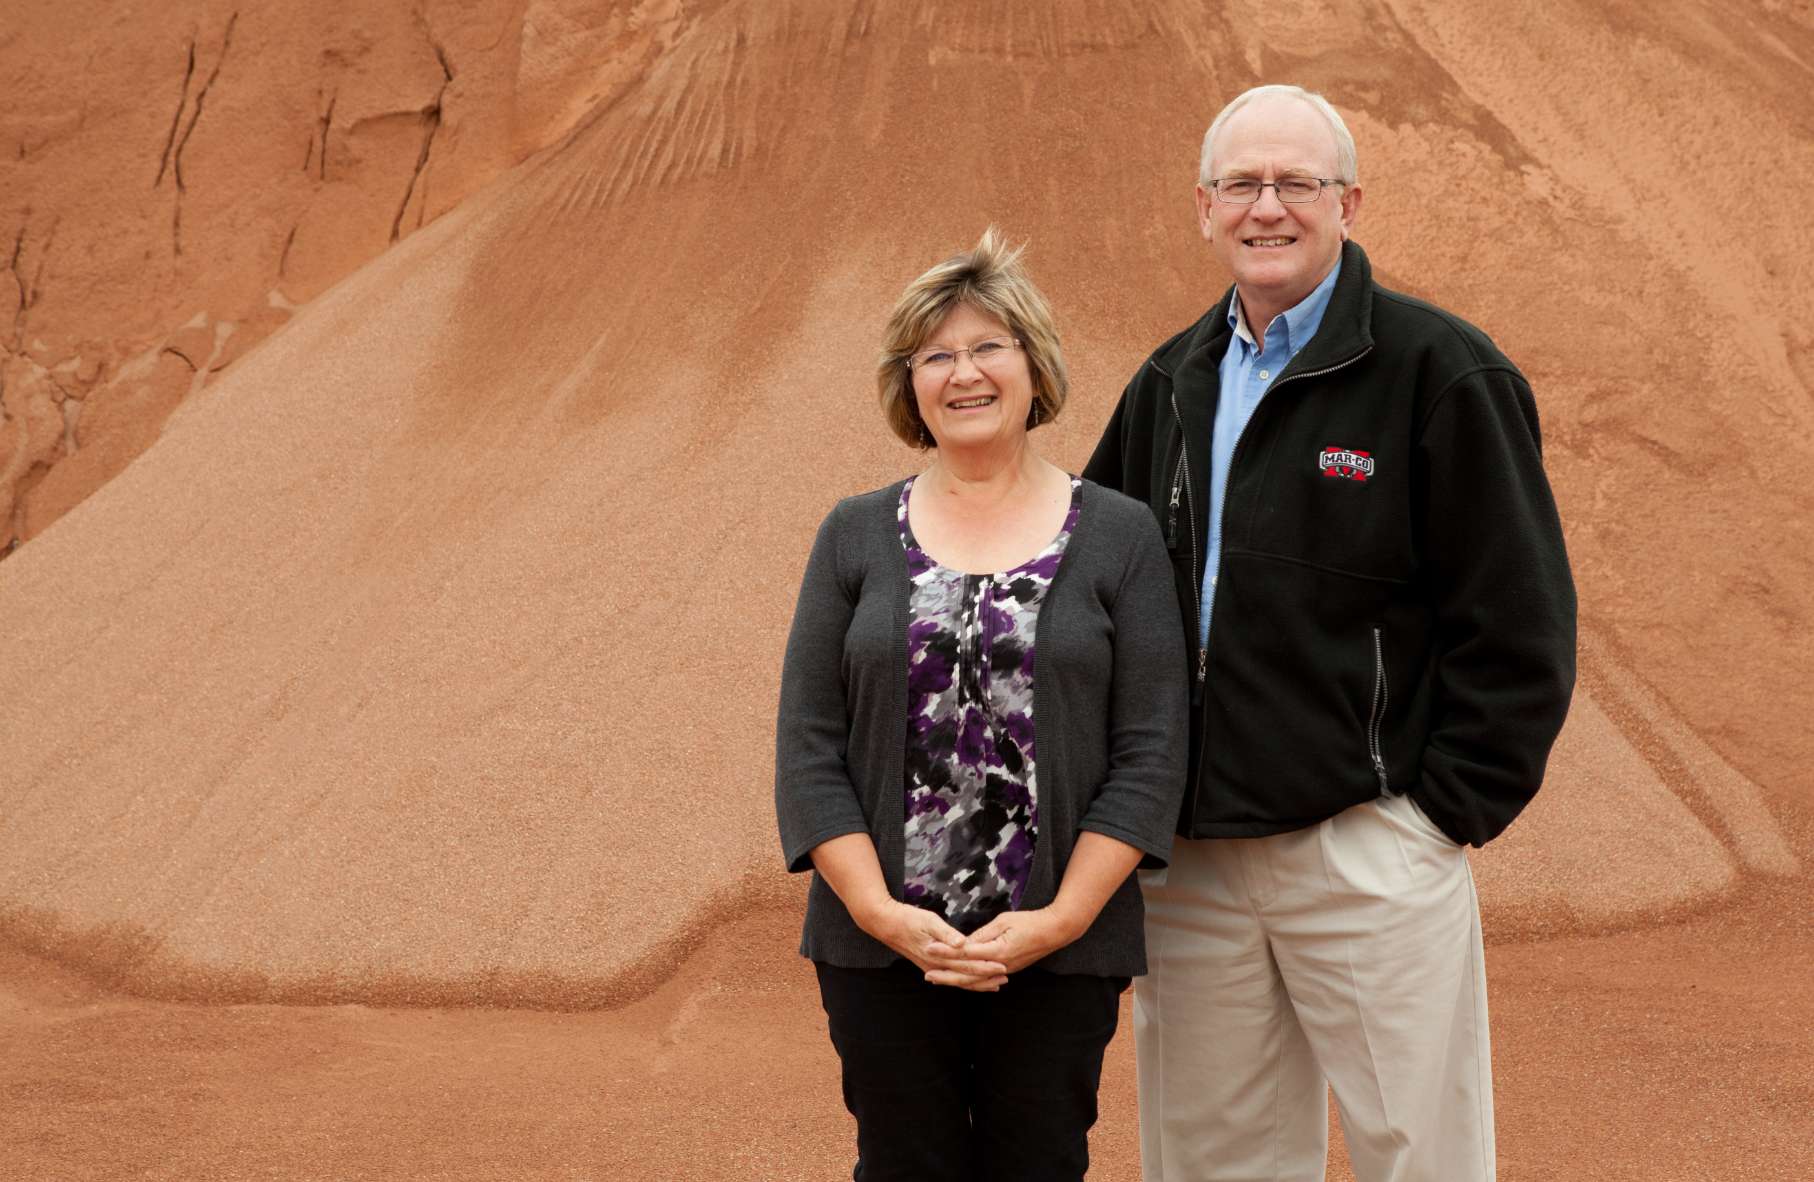 Mar-Co team members standing in front of a pile of clay materials smiling at the camera